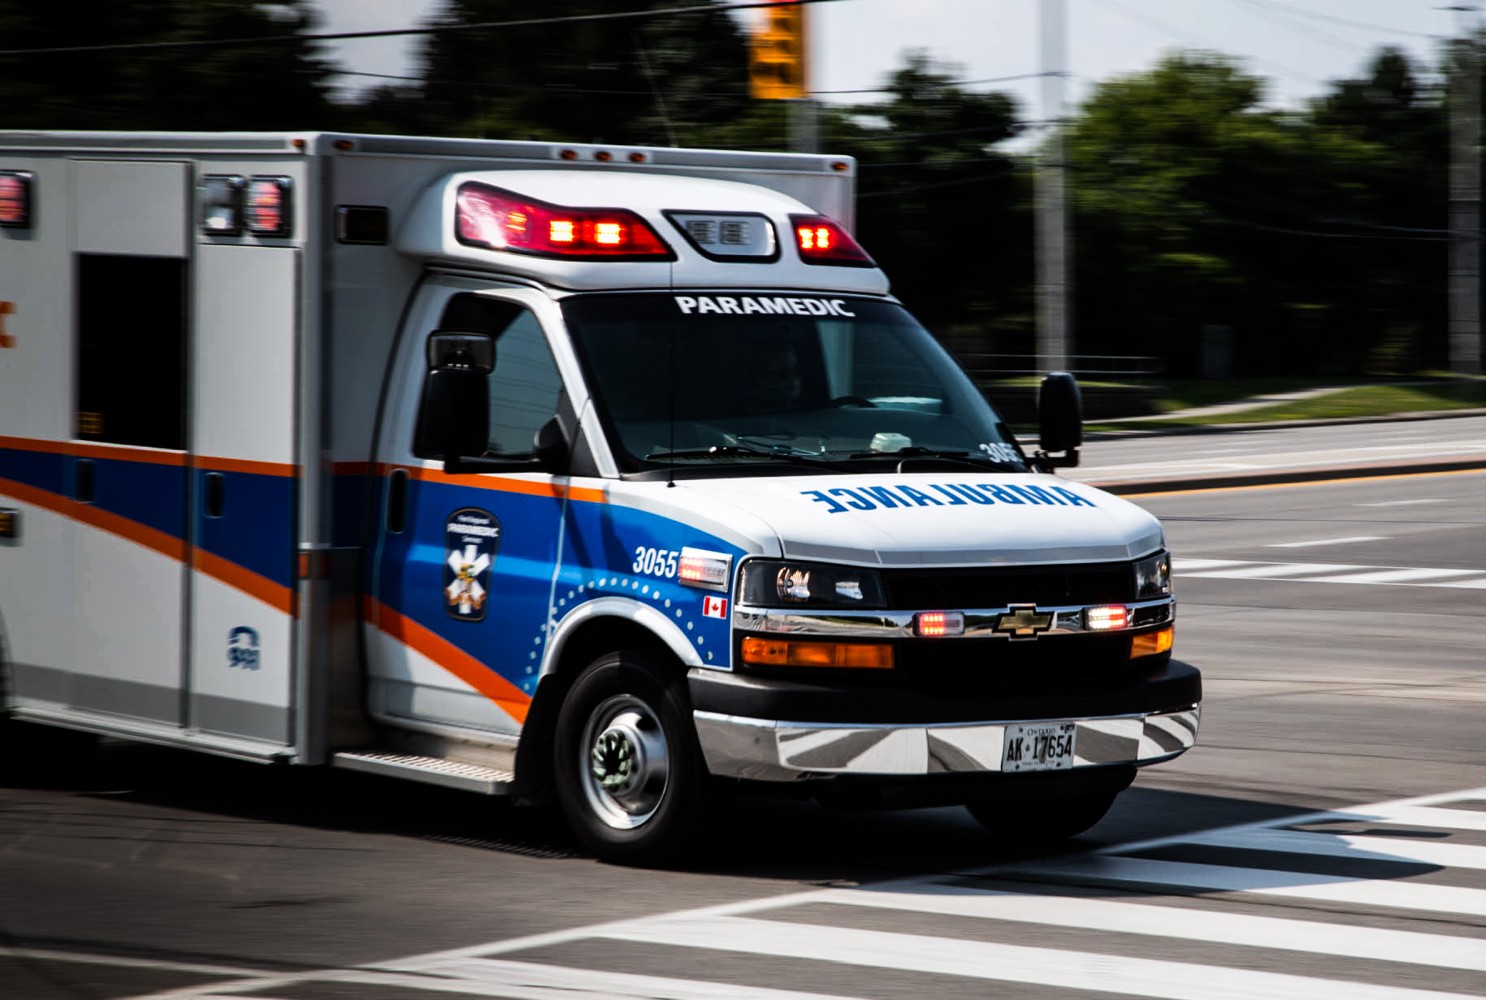 Peel’s paramedics move to challenge regulations that restrict religious freedoms